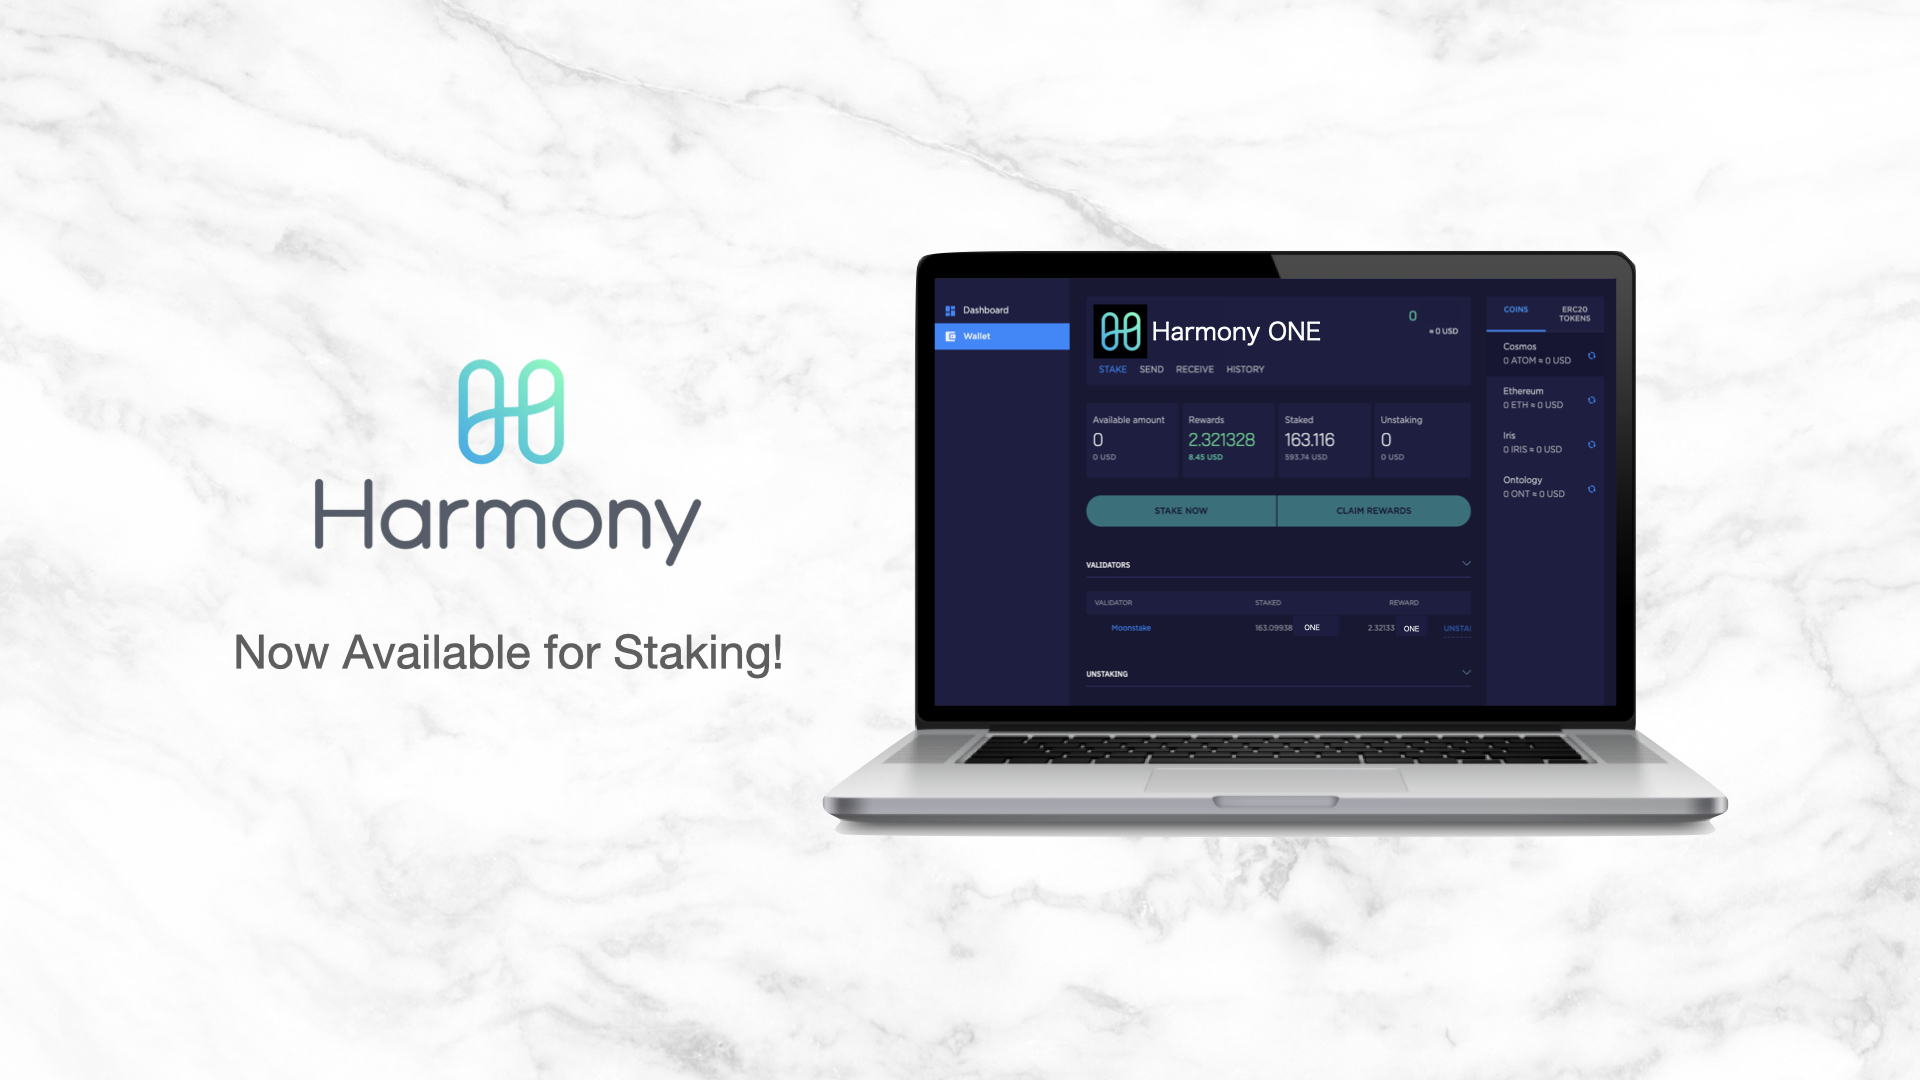 Moonstake launches staking for Harmony - Moonstake